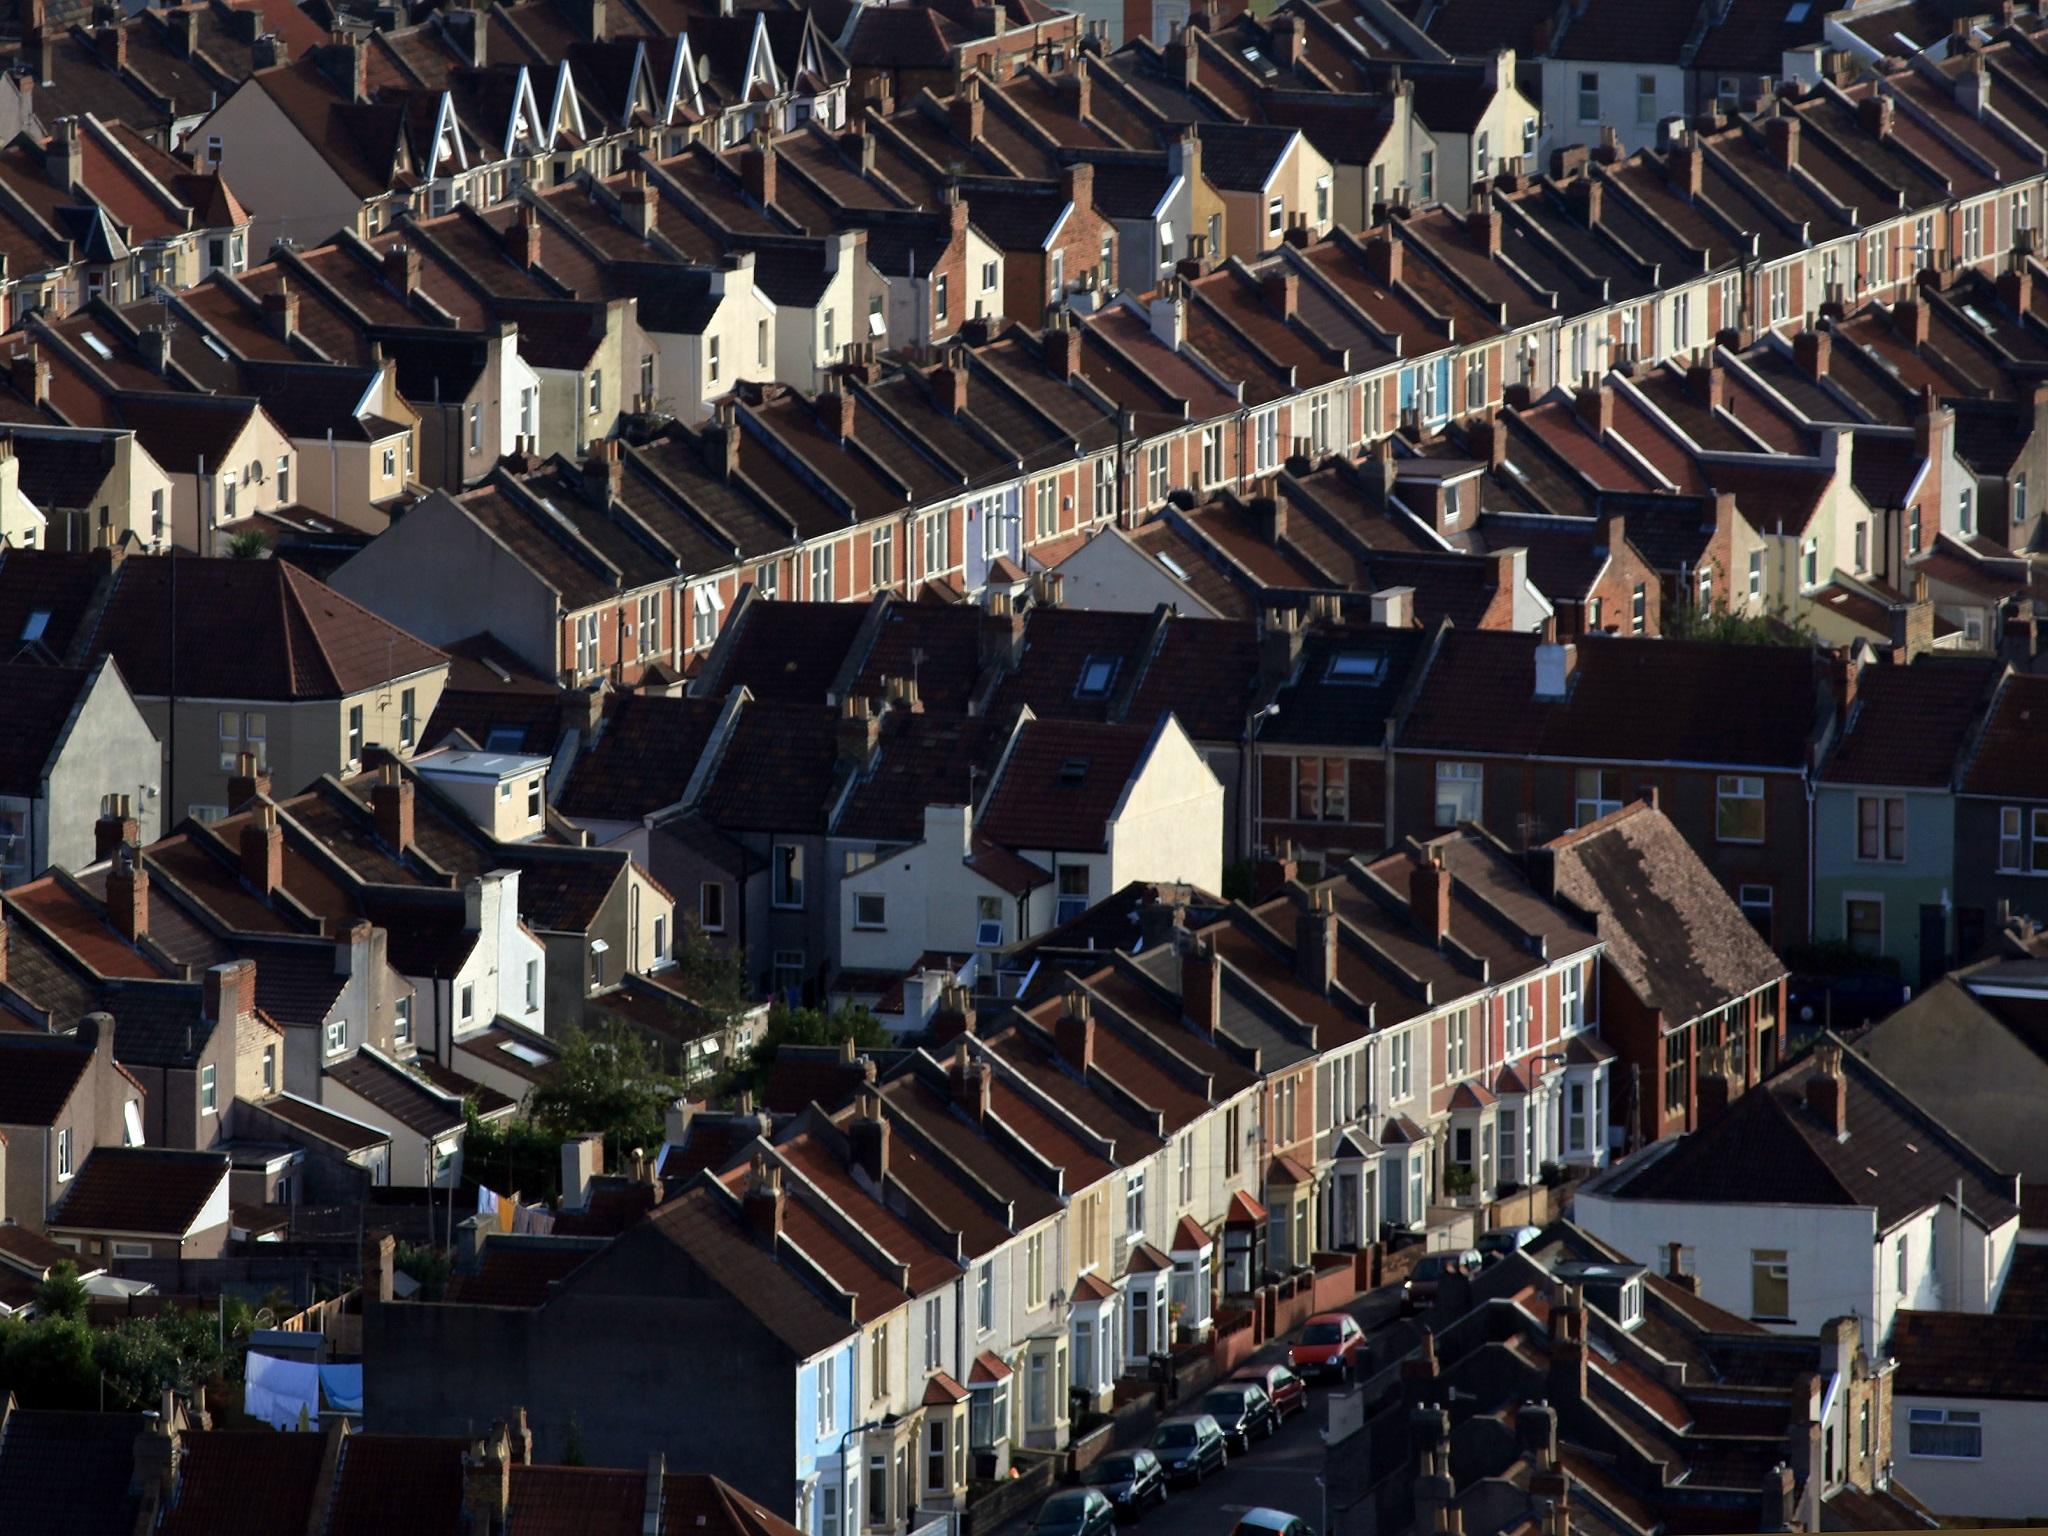 Newham was the first council to introduce compulsory licensing for landlords